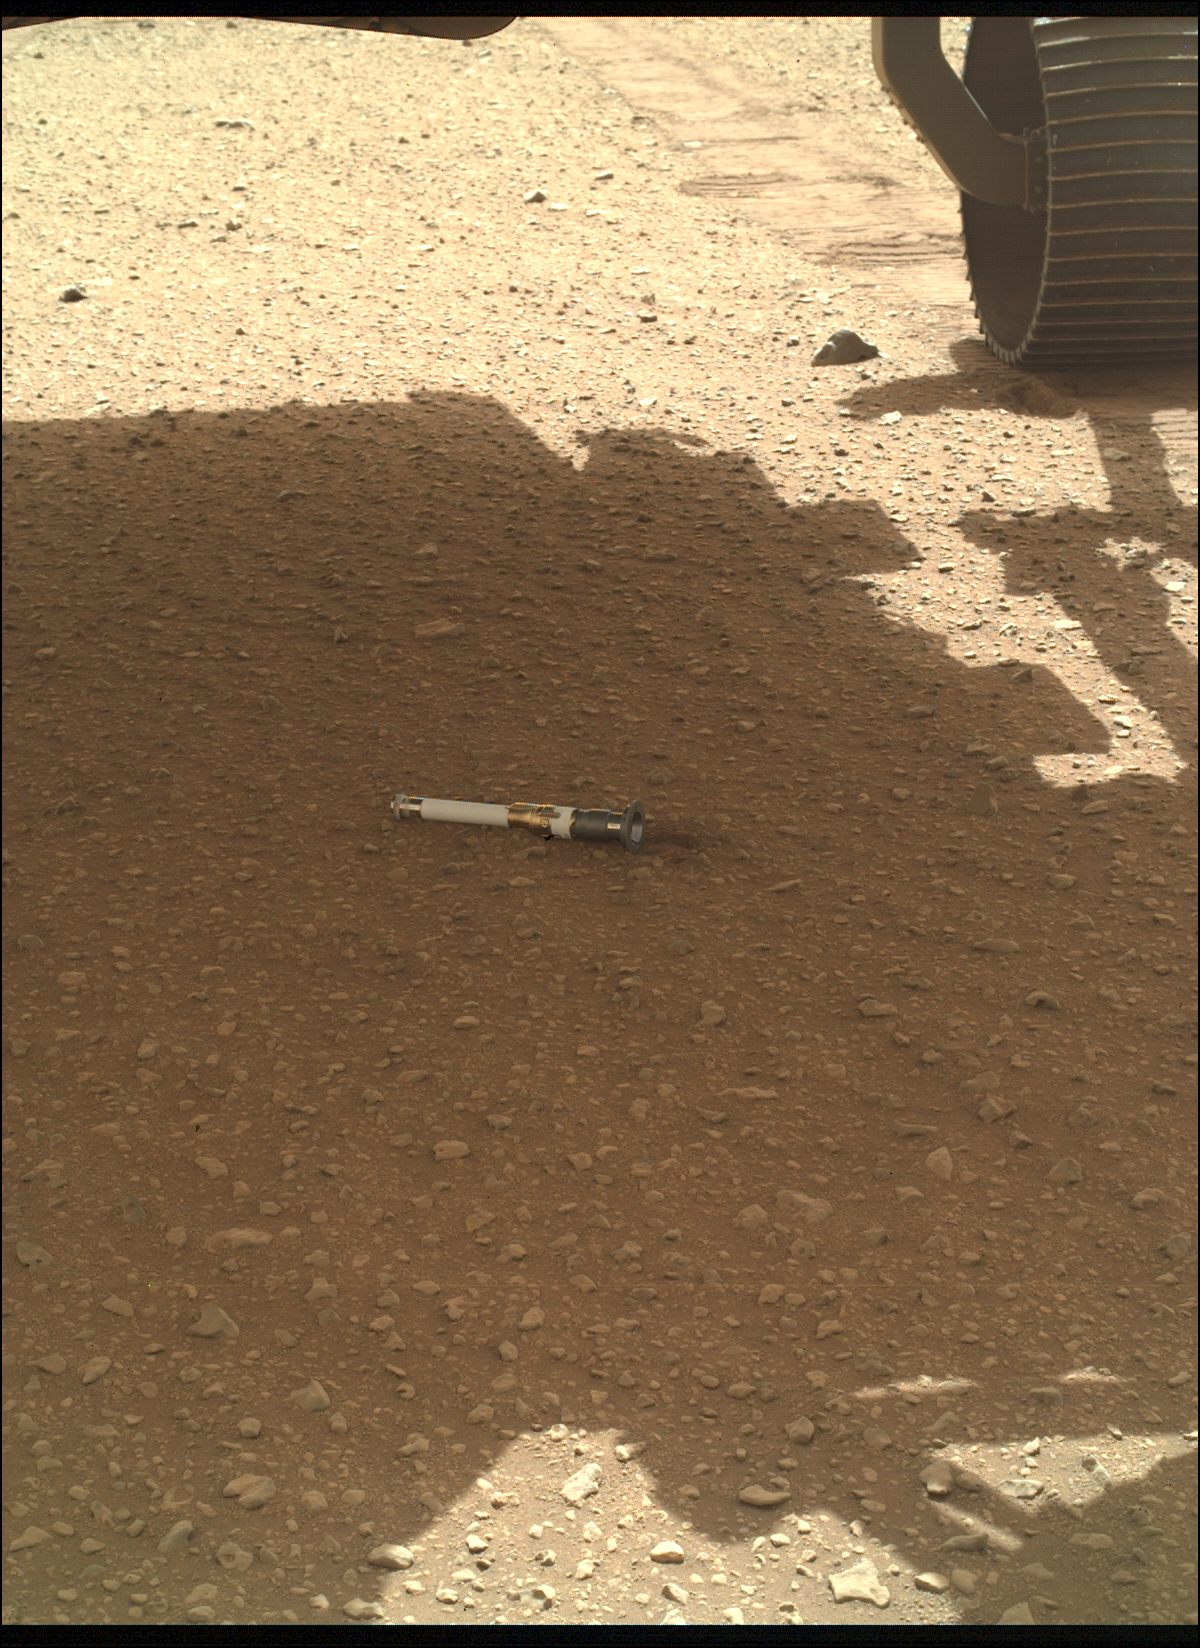 sands of mars with a tube on it.  rover wheels are just in sight